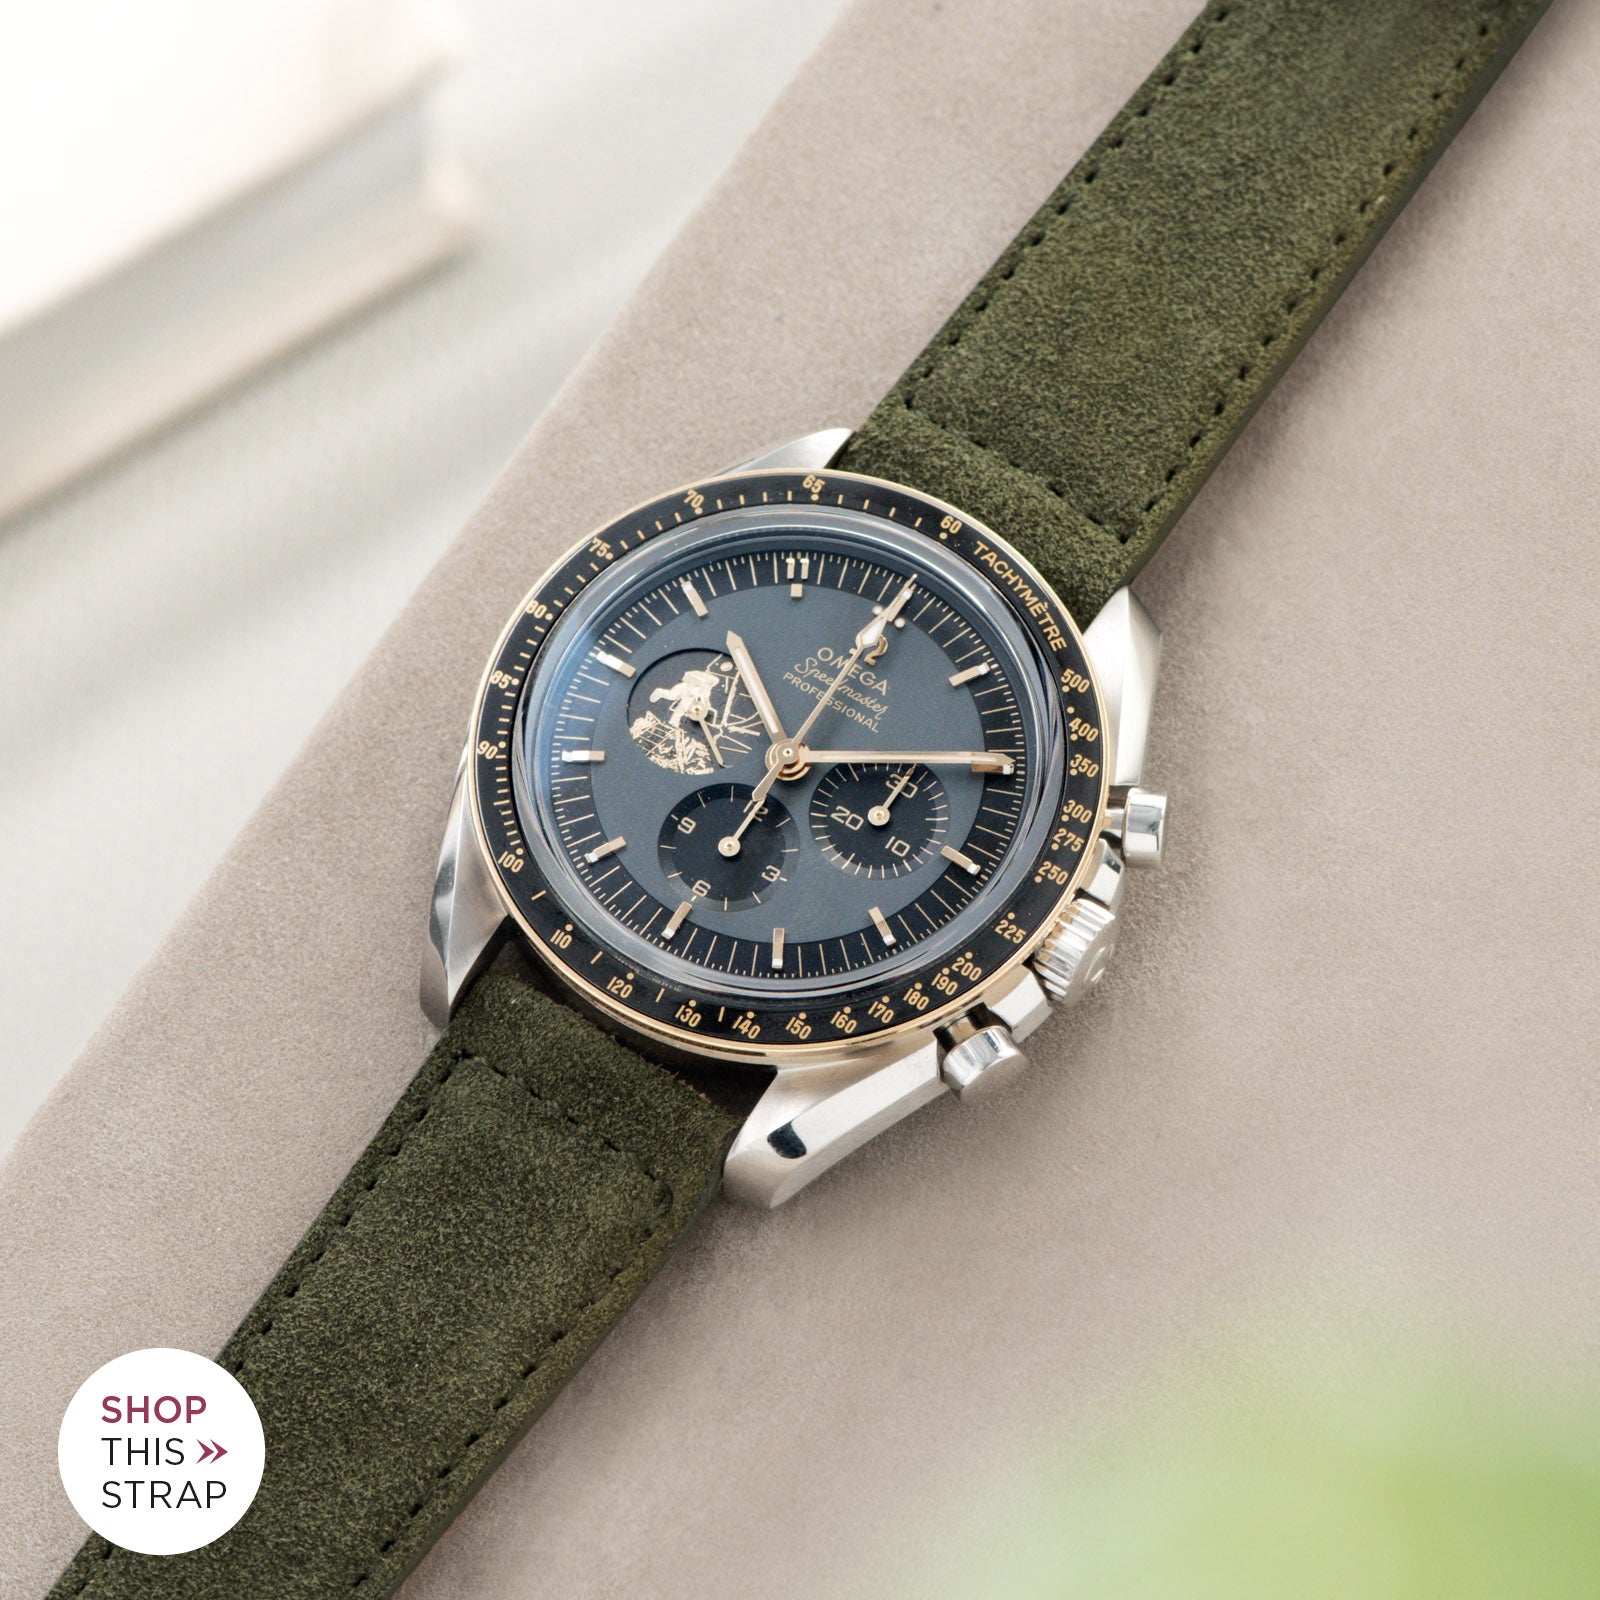 Bulang and Sons_Strap Guide_Omega Speedmaster Apollo 11 50TH Anniversary Watch_Dark Olive Green Suede Leather Watch Strap